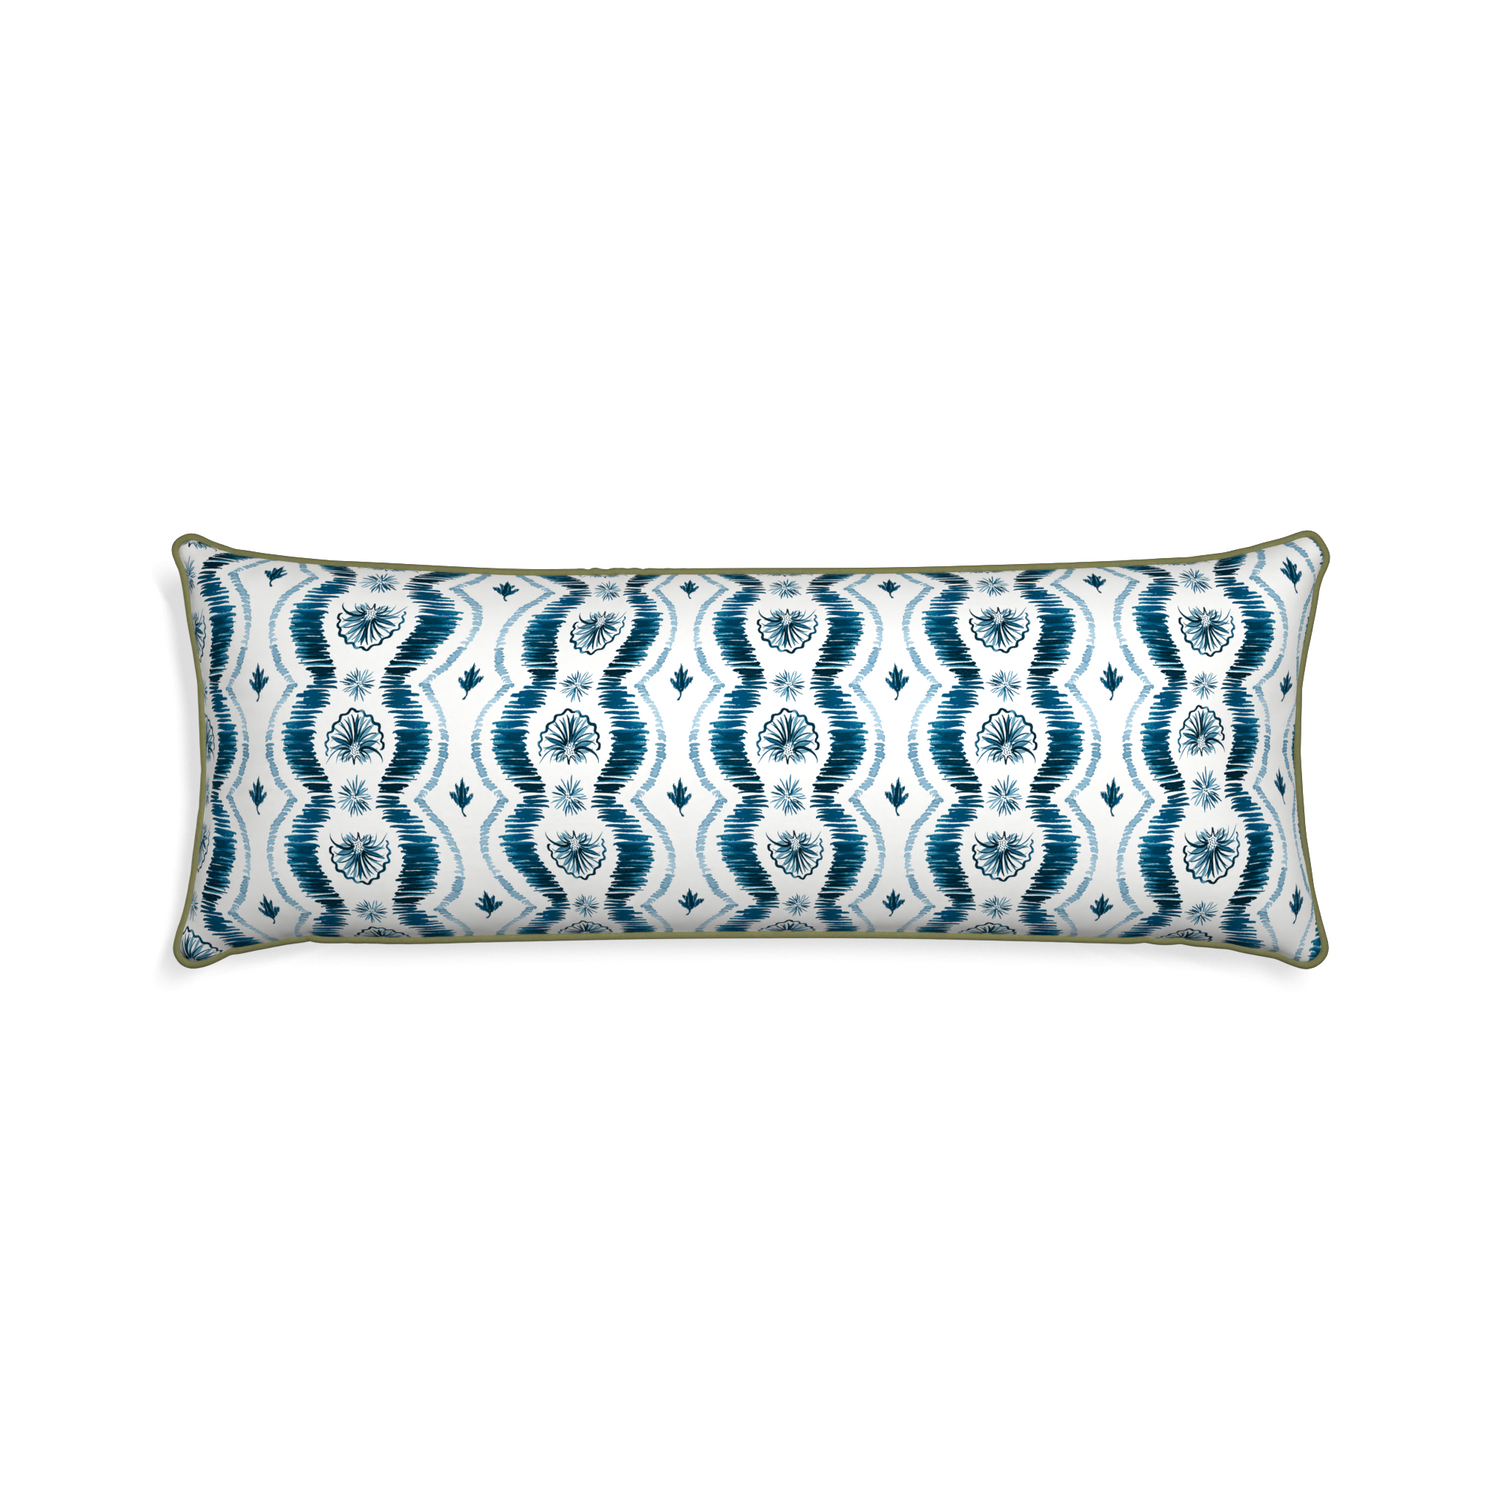 Xl-lumbar alice custom blue ikatpillow with moss piping on white background